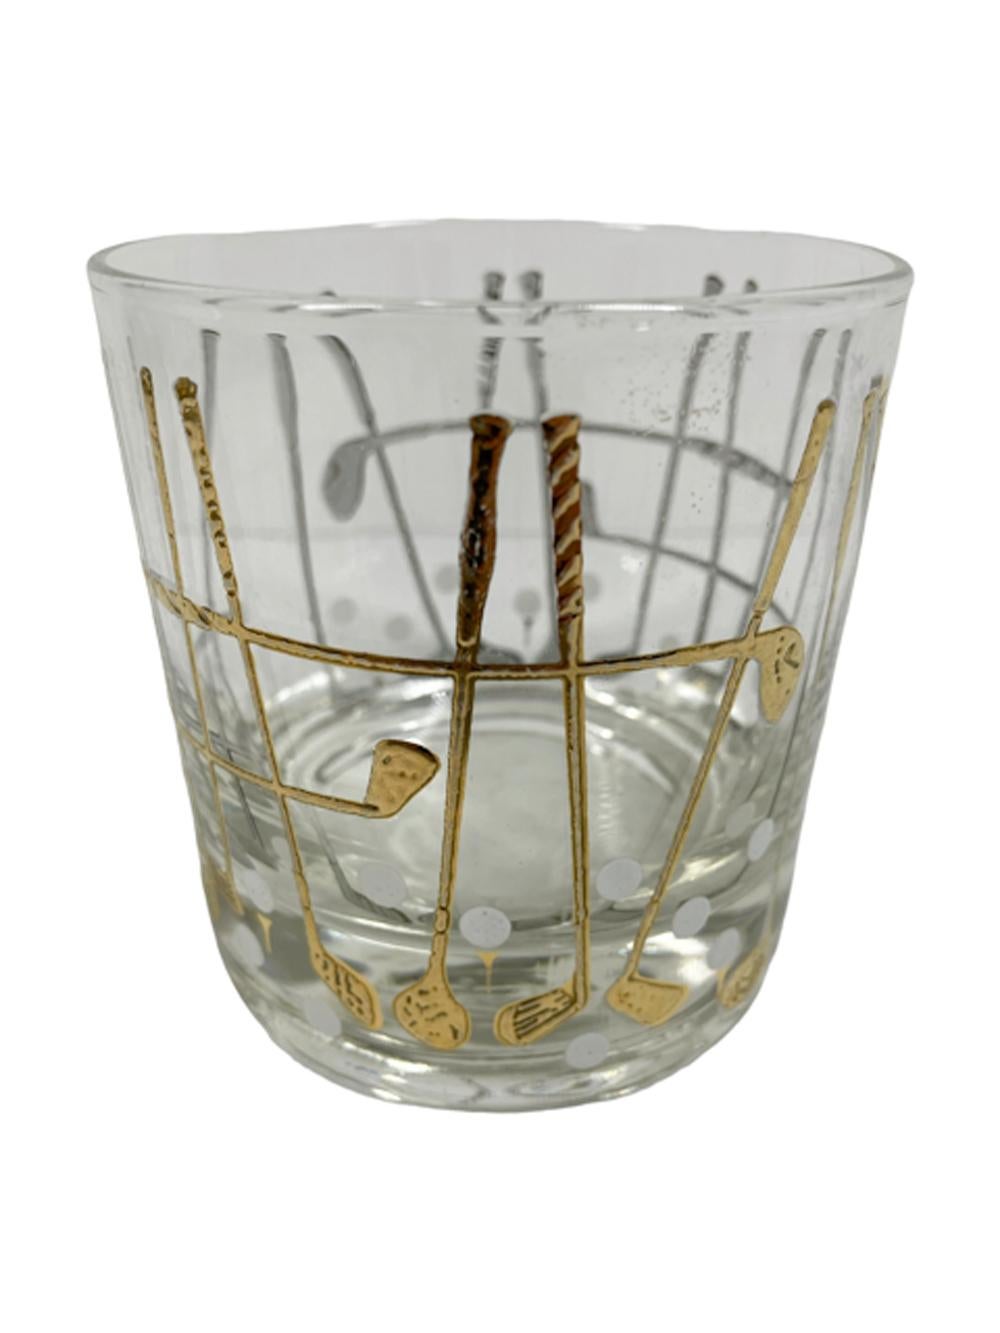 Six Georges Briard Designed Rocks Glasses in the 